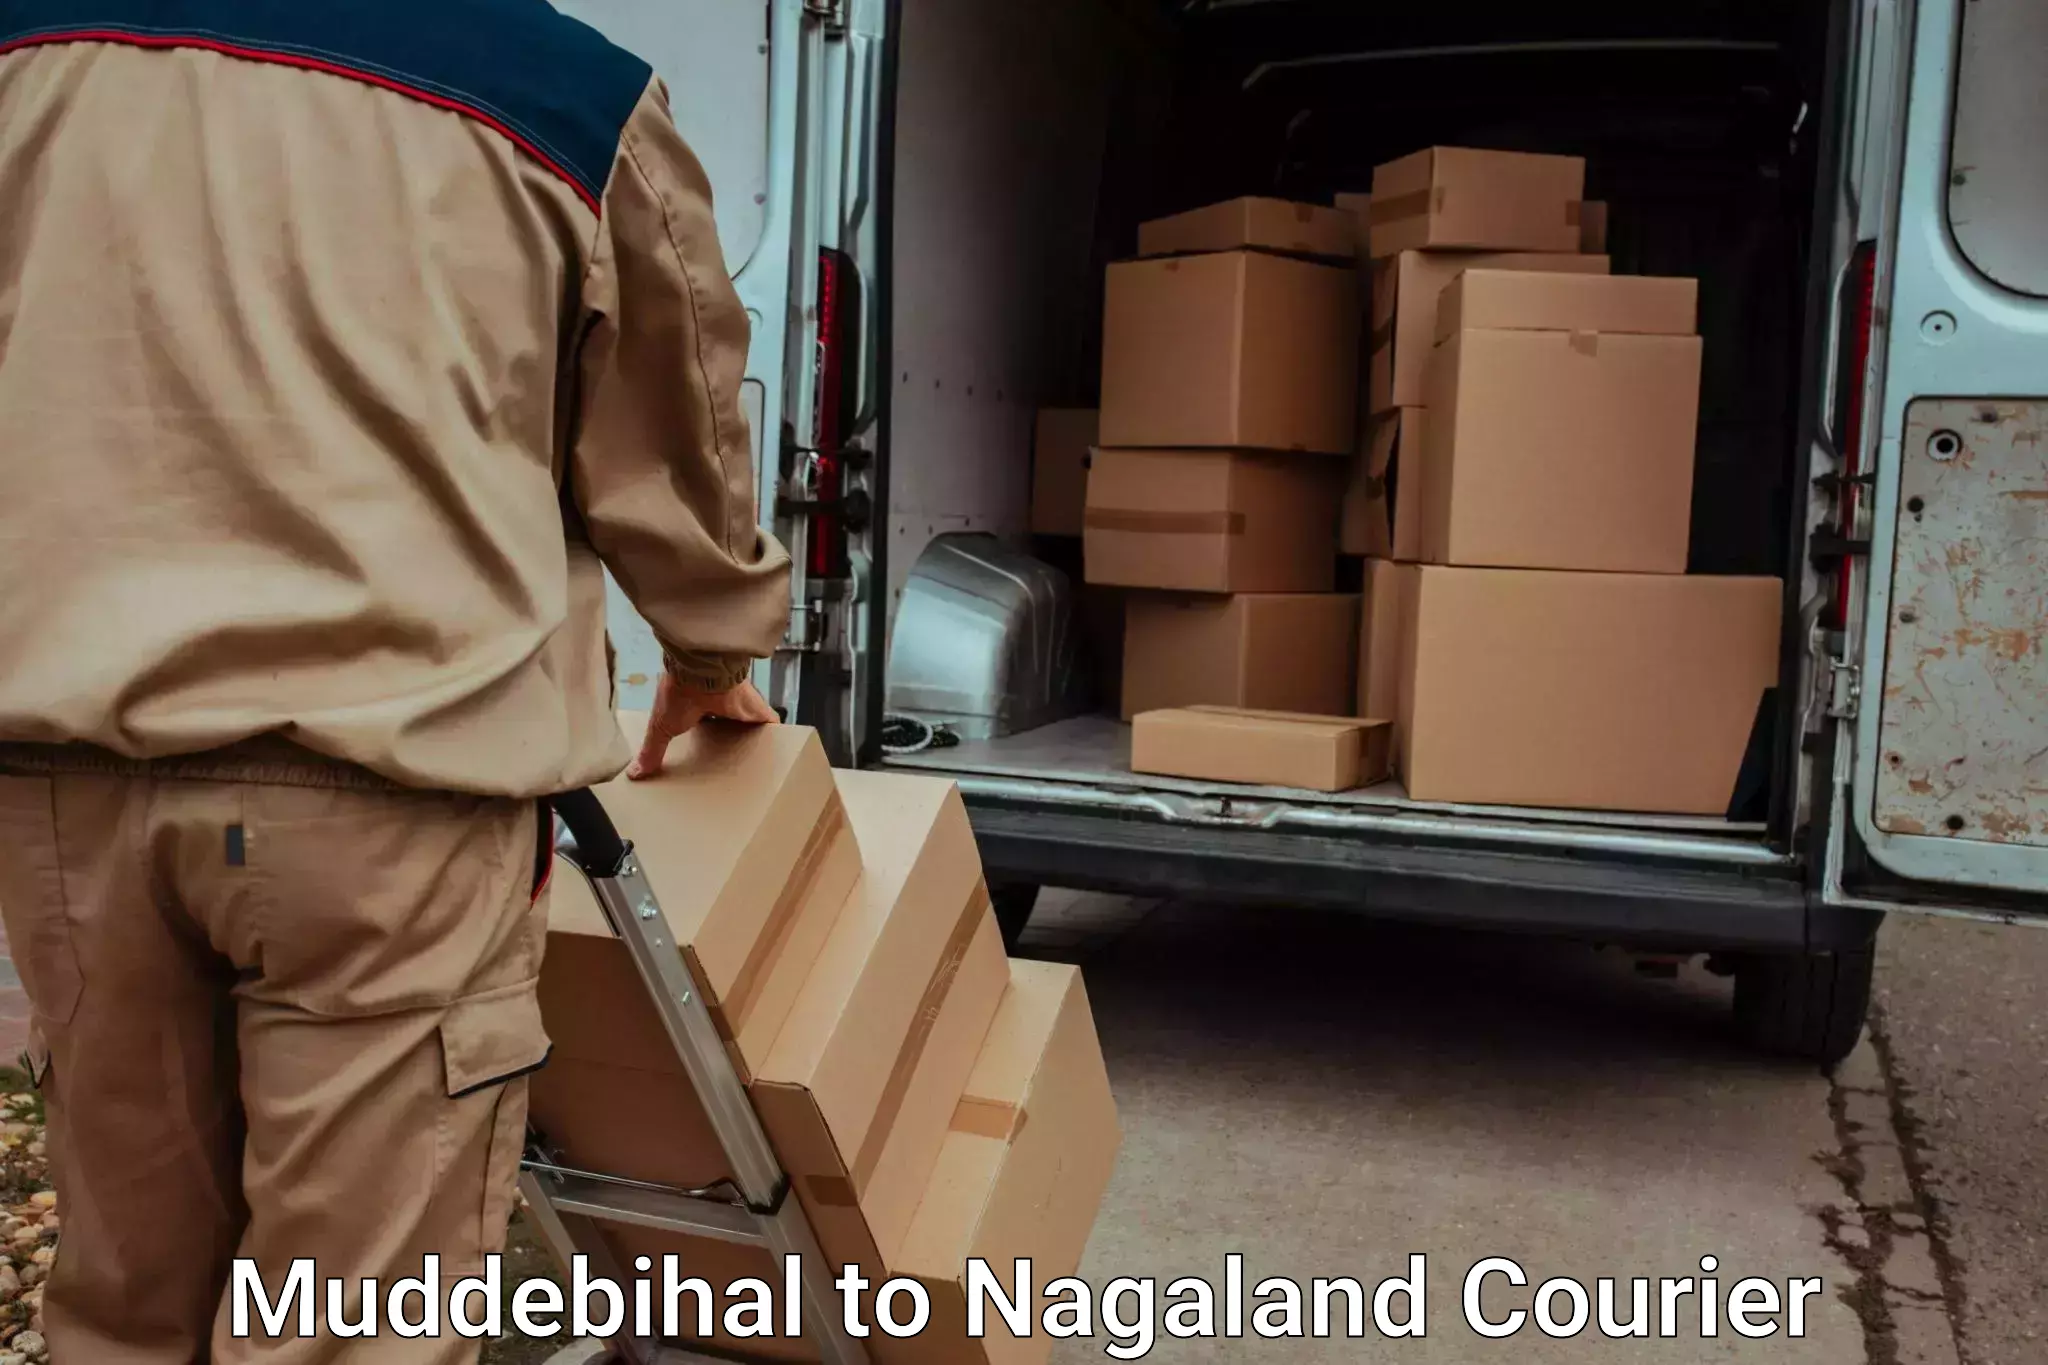 Reliable goods transport Muddebihal to Nagaland